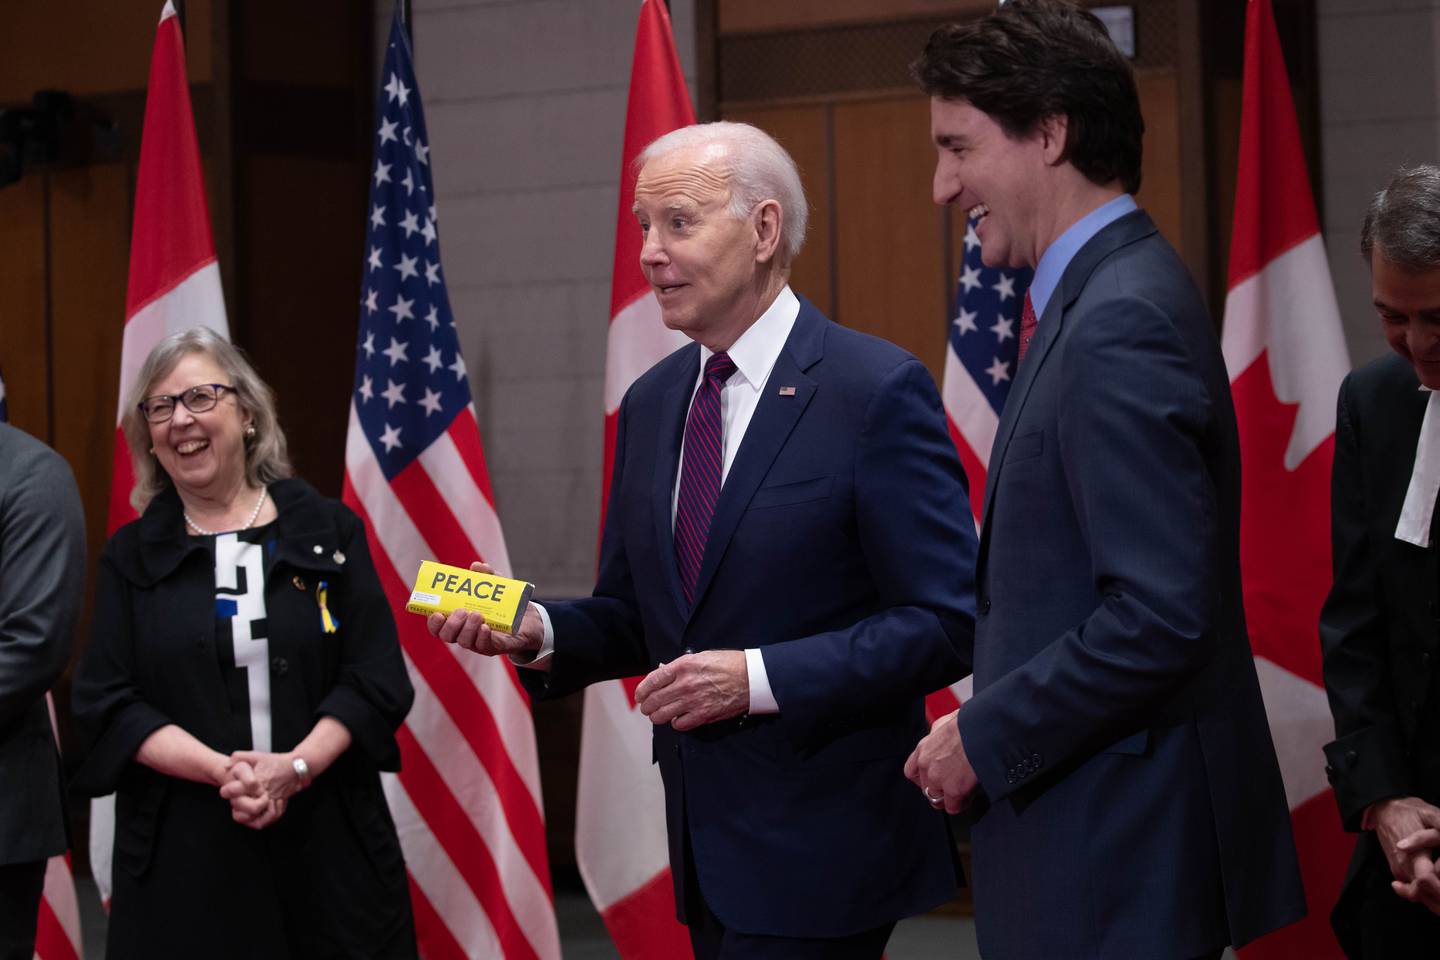 US President Joe Biden, center, holds a Peace by Chocolate bar gifted to him by Elizabeth May, leader of the Green Party, left, on Parliament Hill in Ottawa, Ontario, Canada, on Friday, March 24, 2023. Photographer: David Kawai/Bloomberg